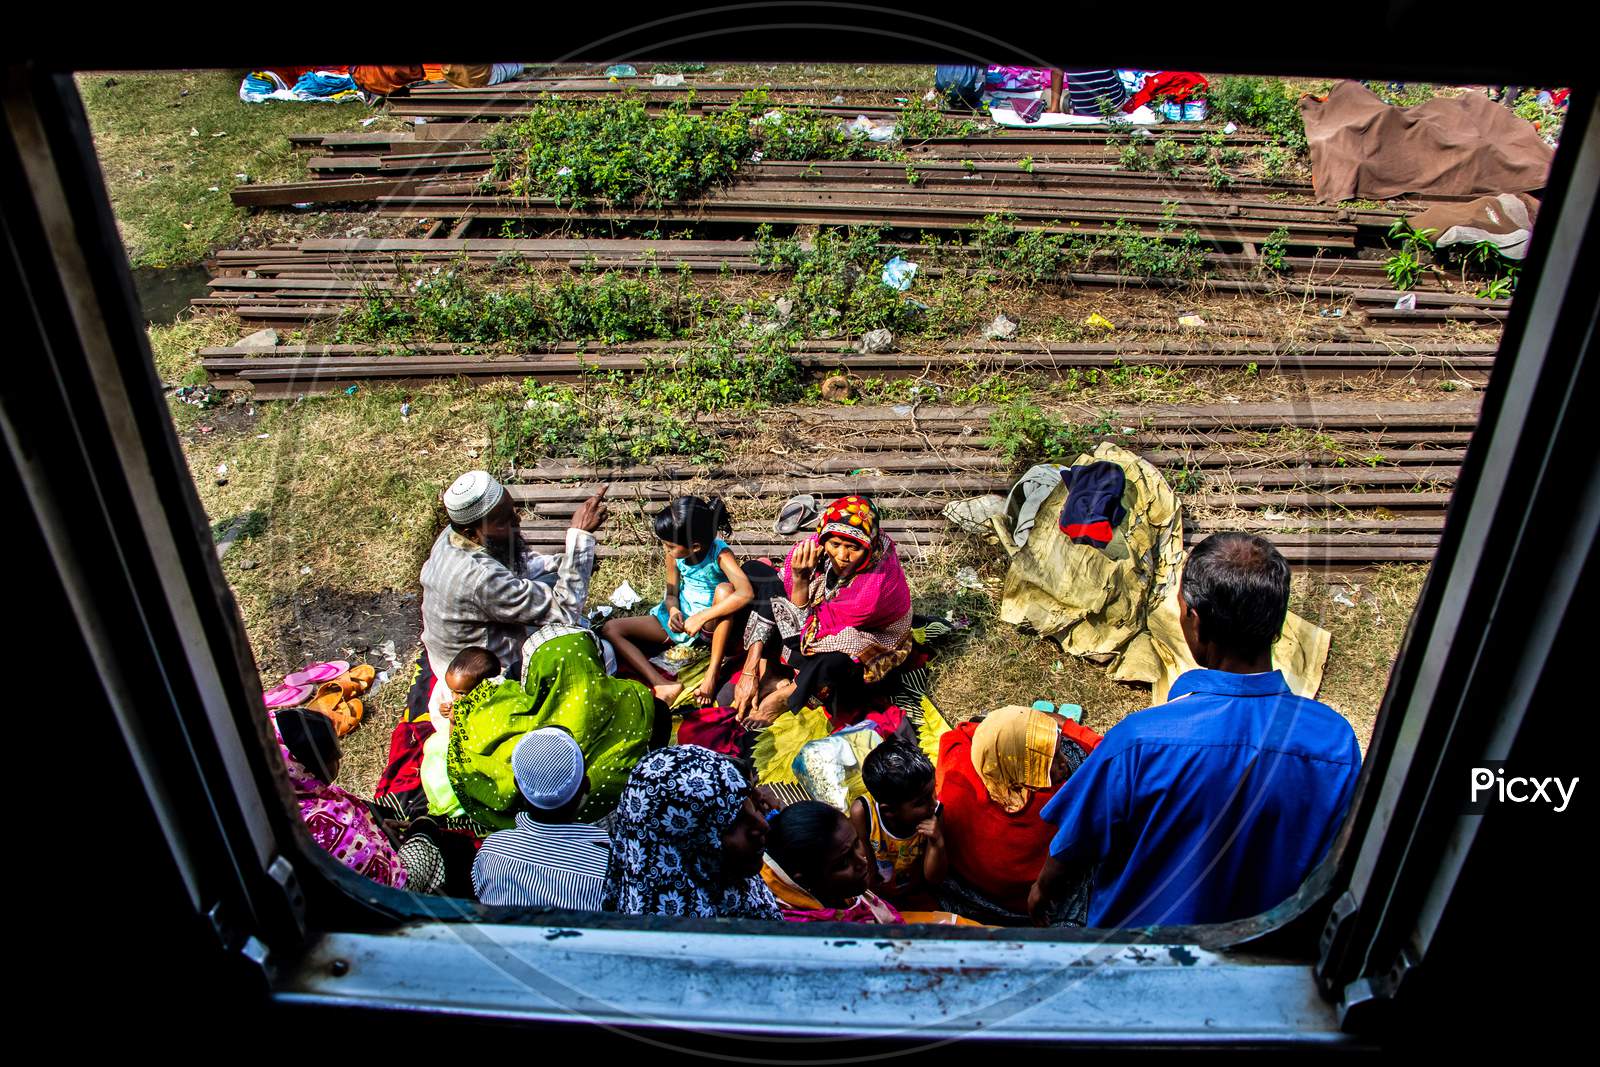 People Are Waiting For The Train I Captured This Image On 19Th February 2019 From Tonggi, Bangladesh, Asia, South Asia